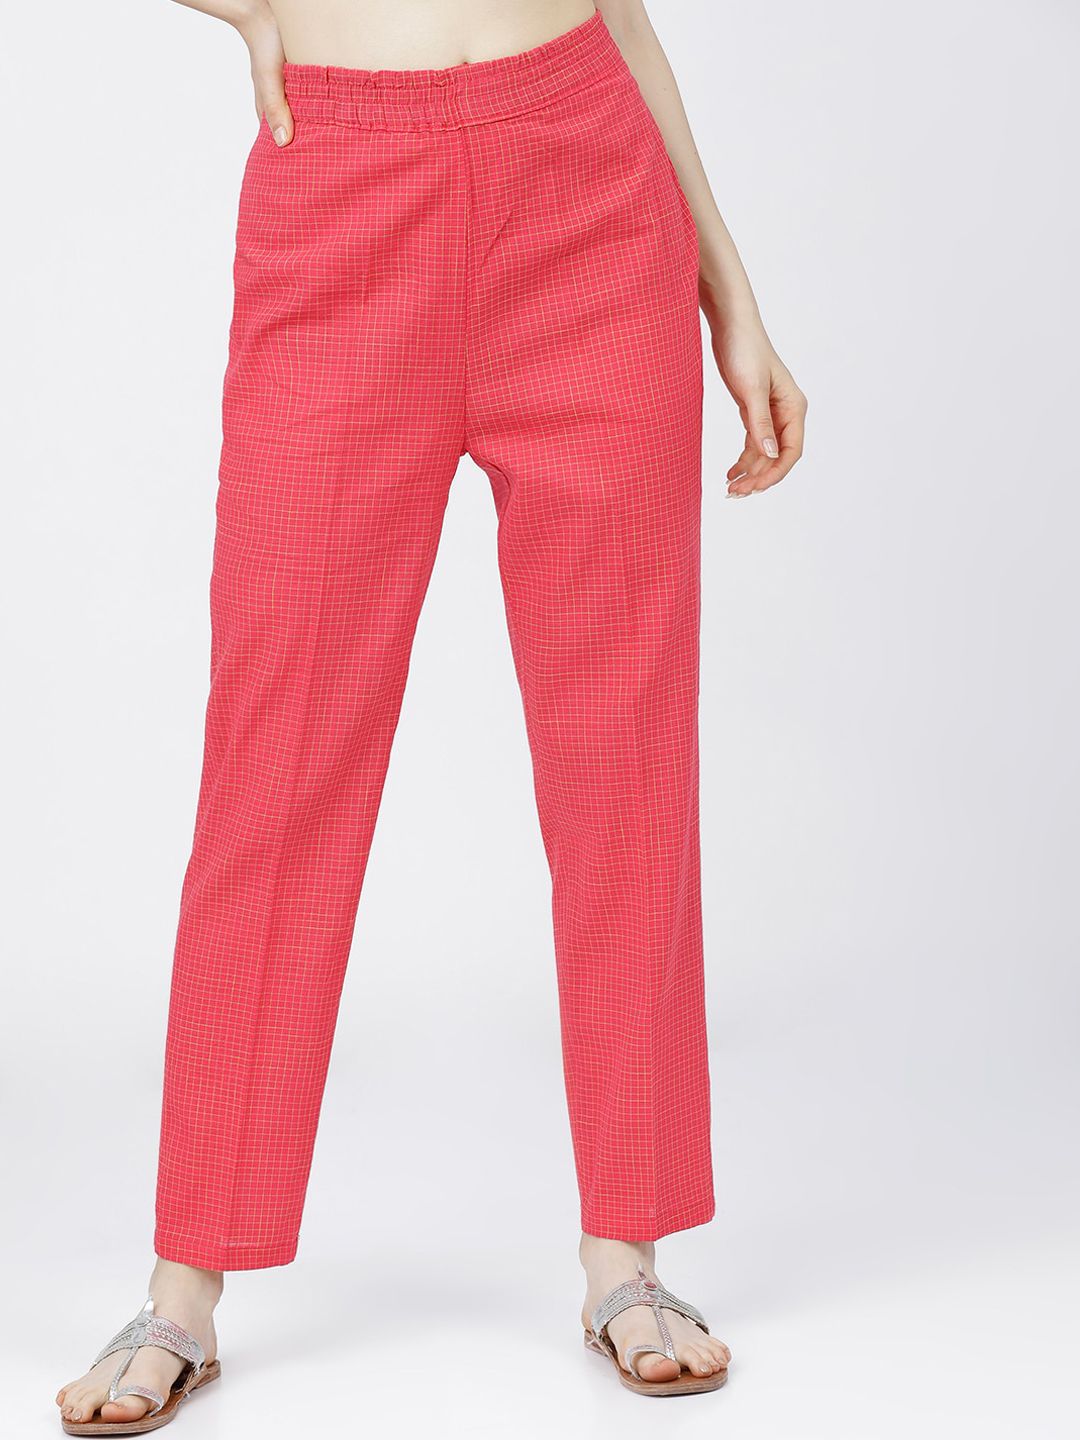 Vishudh Women Pink Checked Slim Fit Trousers Price in India